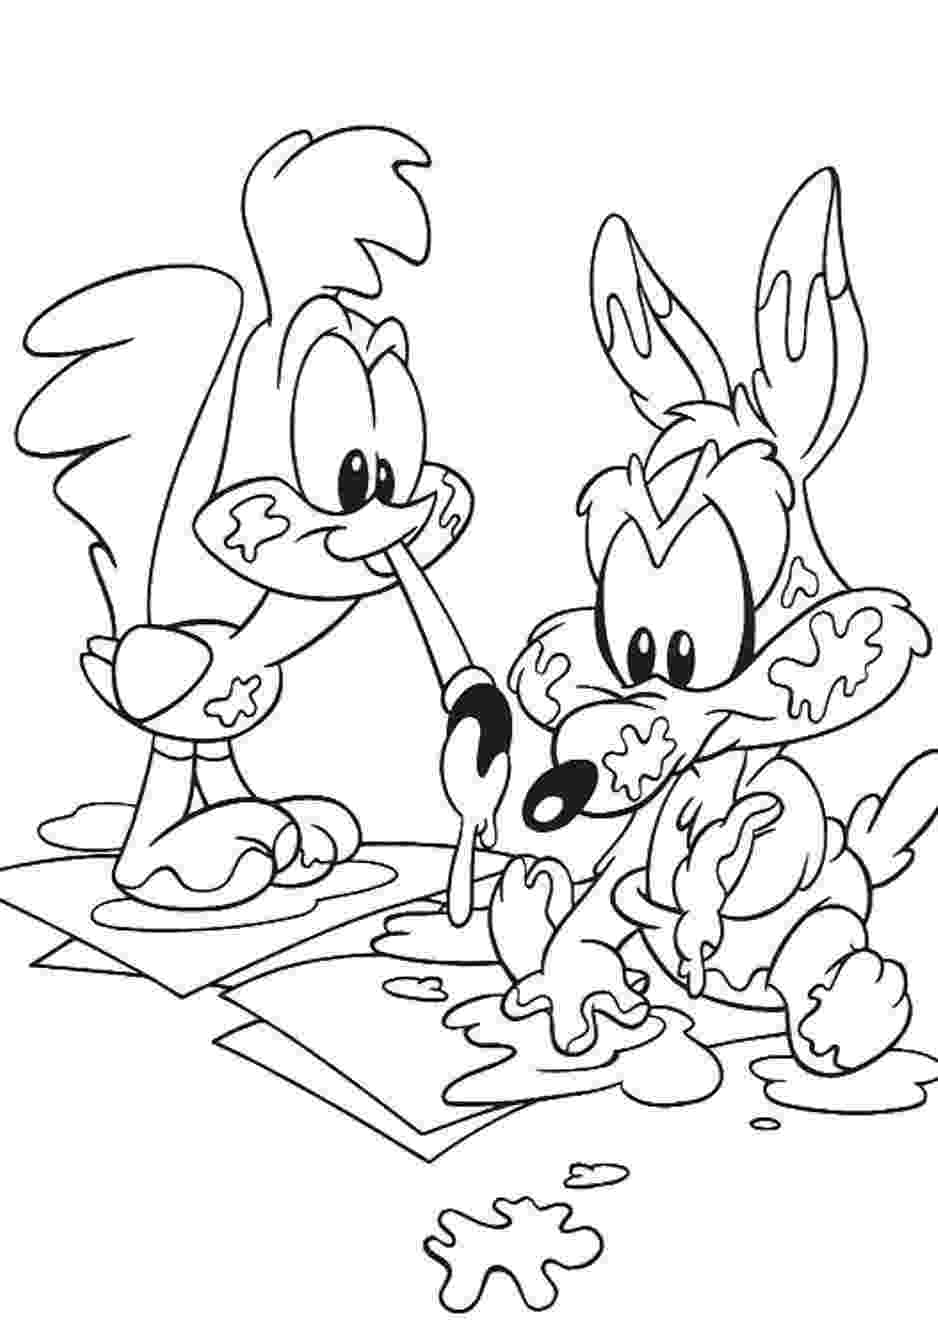 looney tunes coloring pages to print free printable looney tunes coloring pages coloring home pages tunes coloring print to looney 